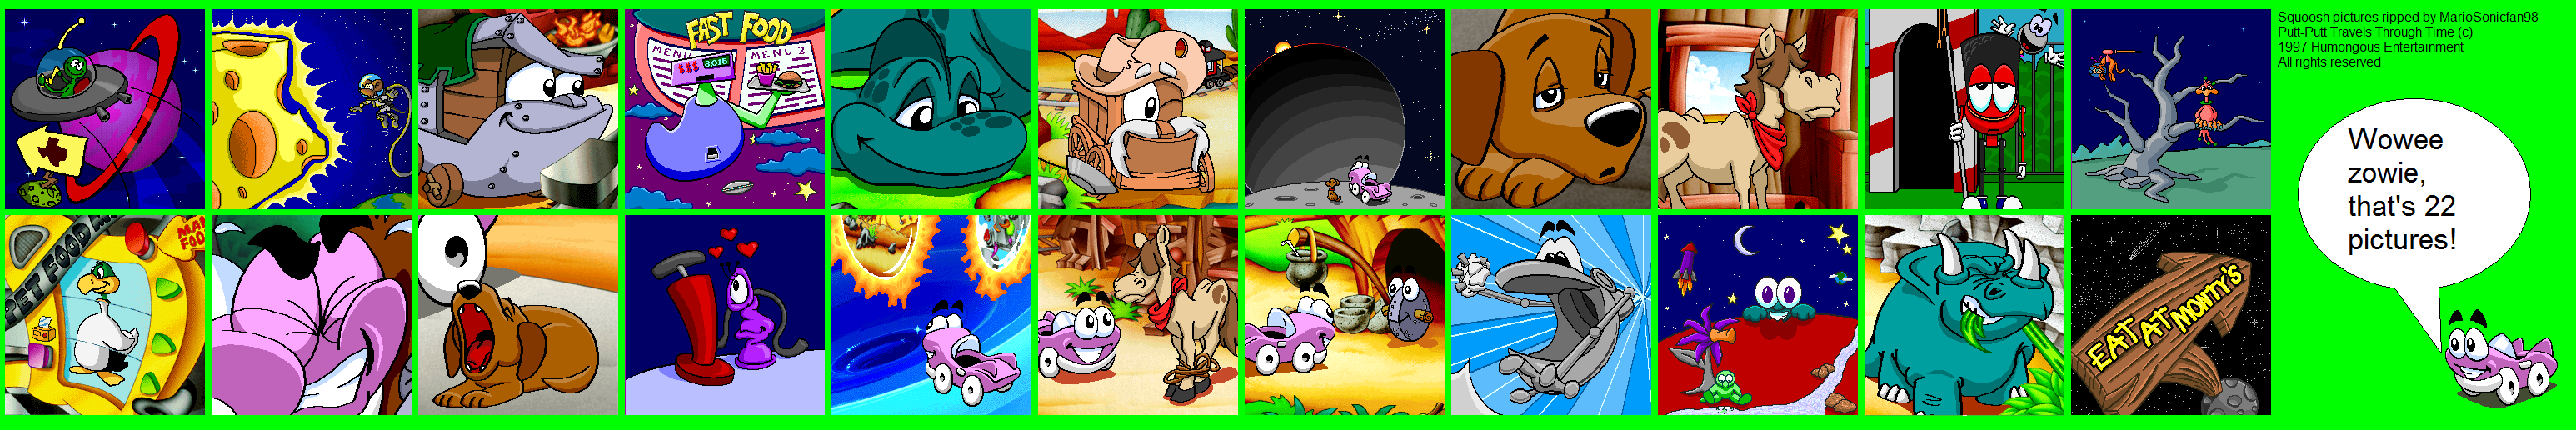 Putt-Putt Travels Through Time - Pictures